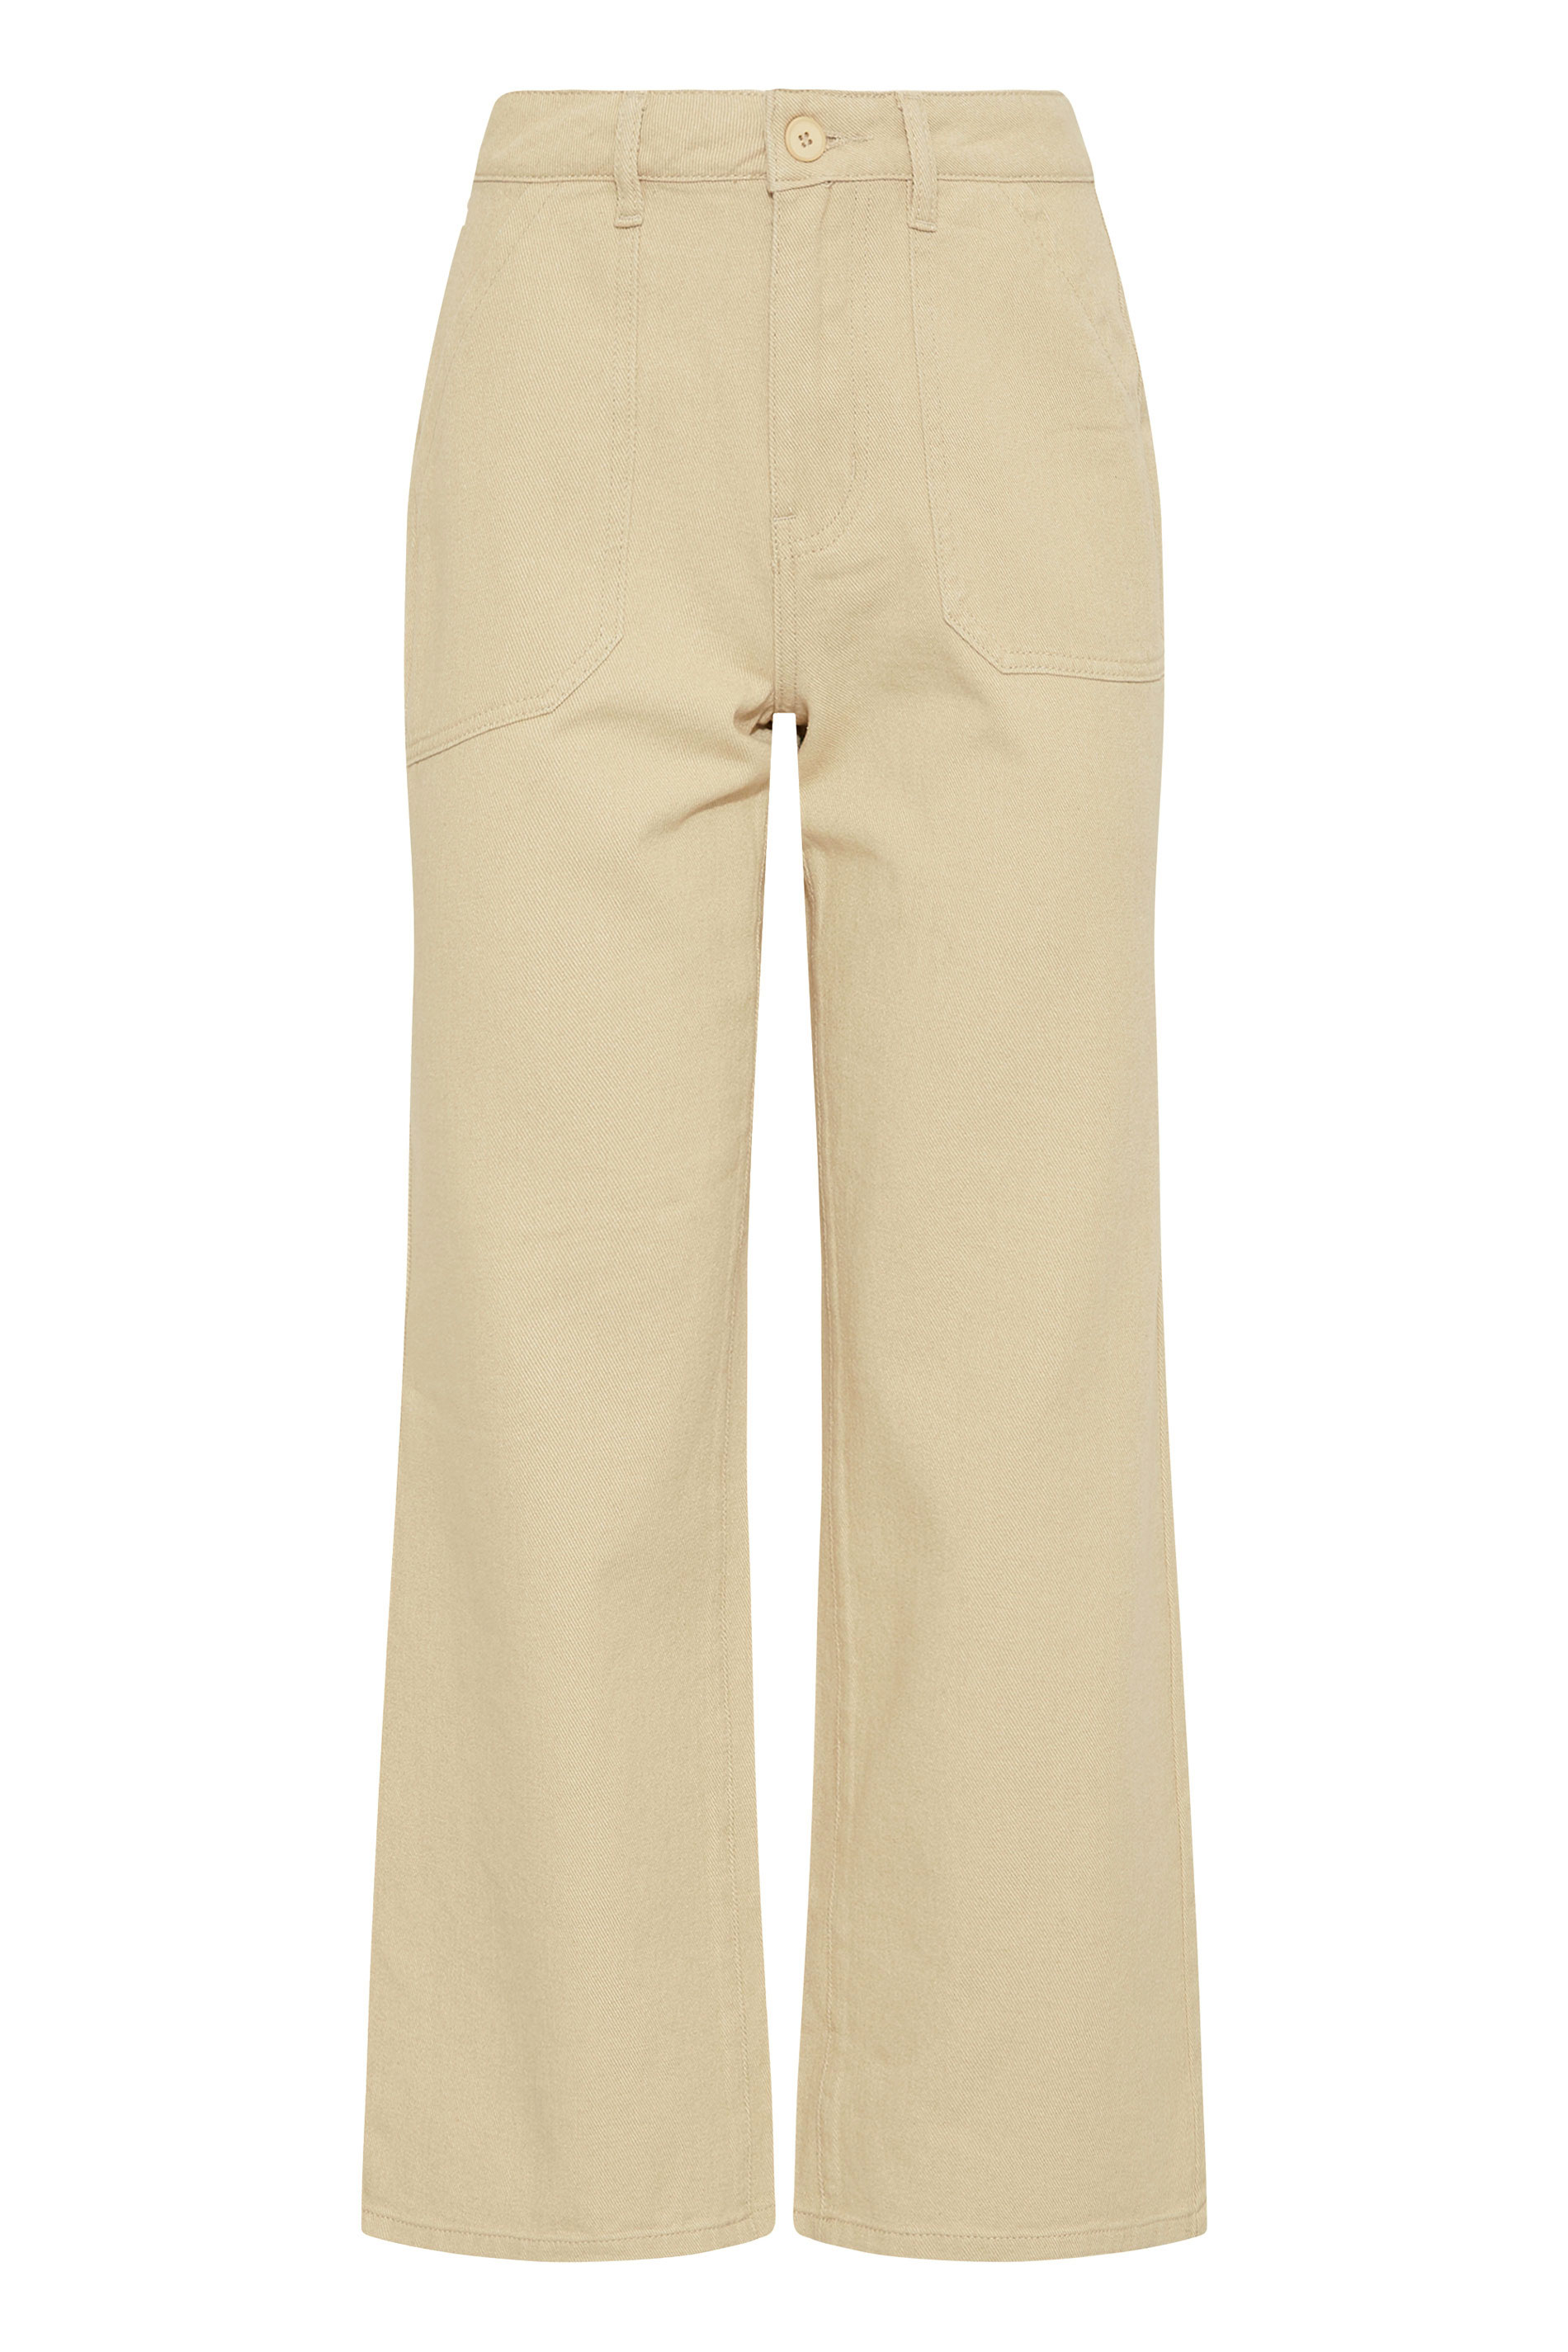 LTS Tall Women's Cream Cotton Twill Wide Leg Cropped Trousers | Long ...